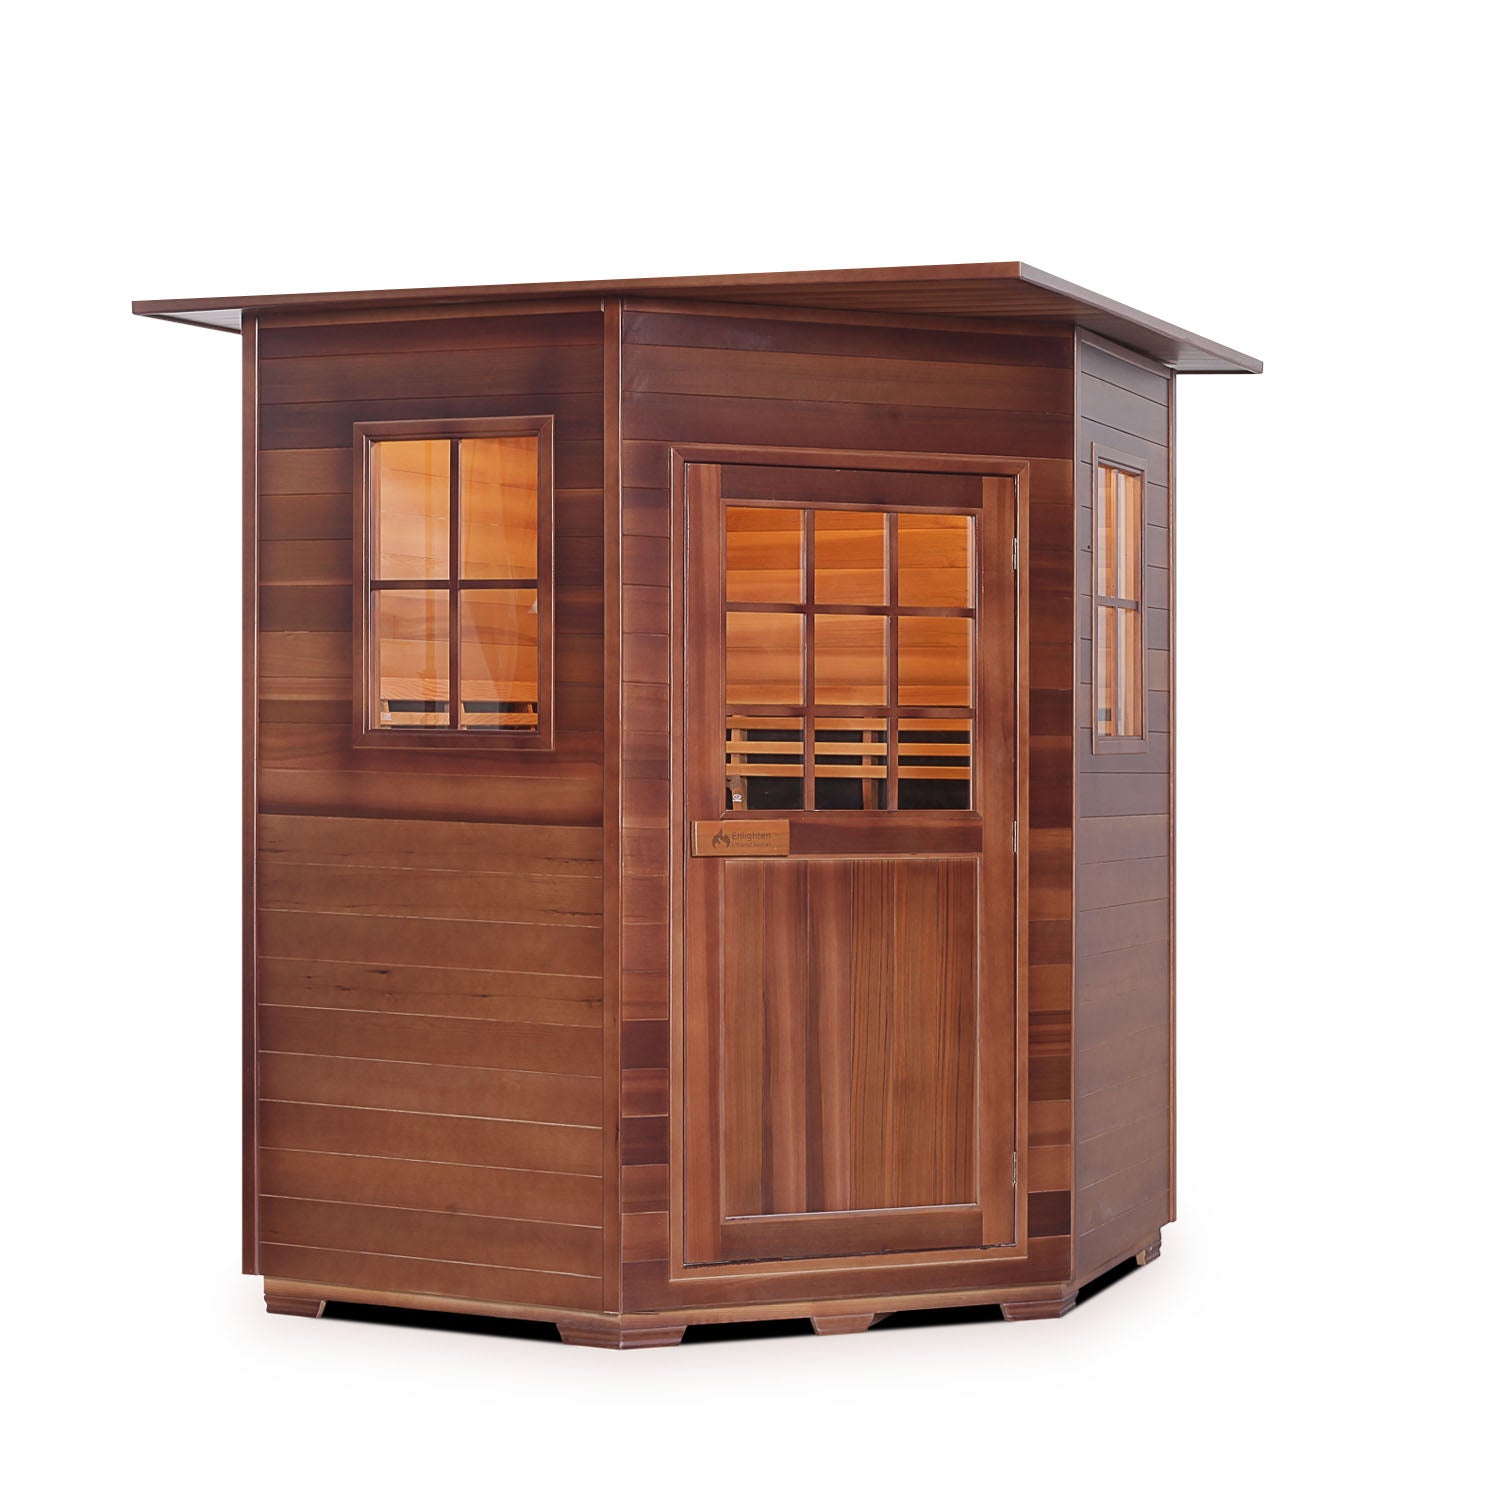 Enlighten Sauna InfraNature Original Infrared Canadian Red Cedar Wood Outside And Inside with indoor Roofed four person sauna front view